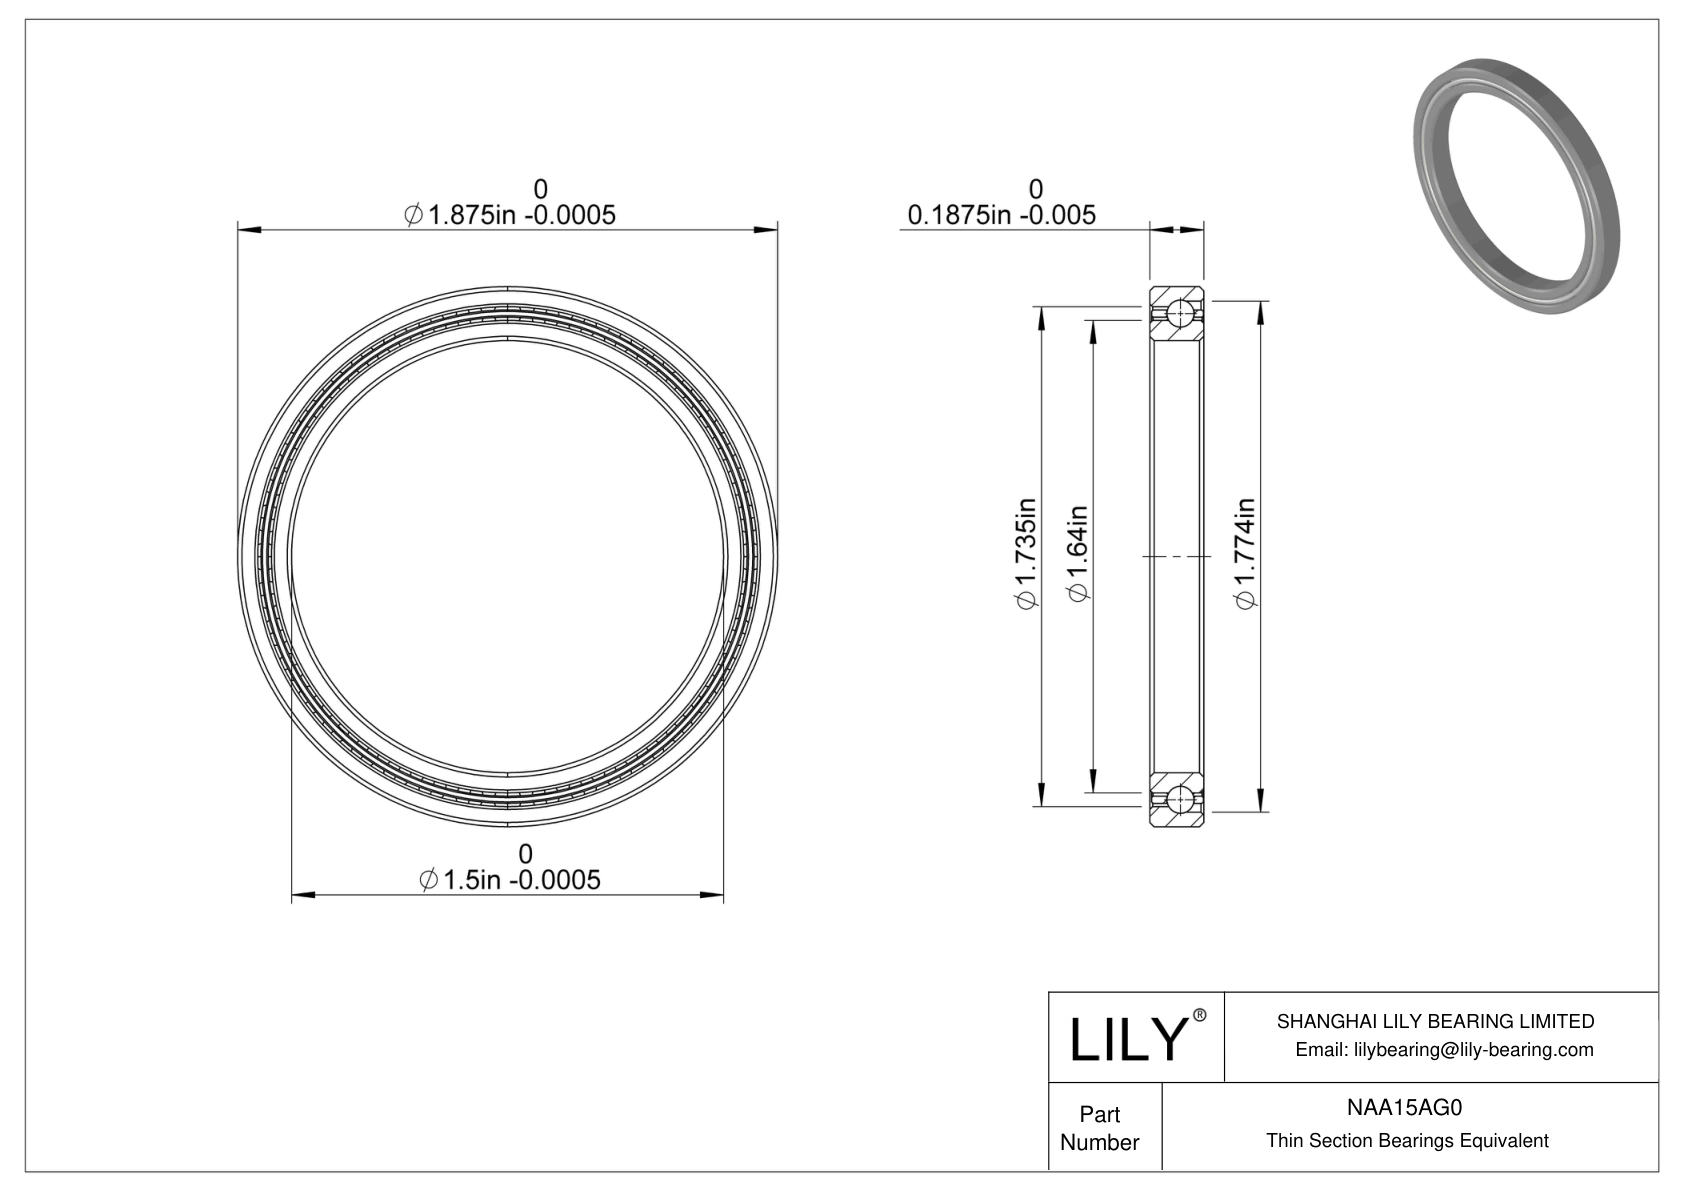 NAA15AG0 Constant Section (CS) Bearings cad drawing